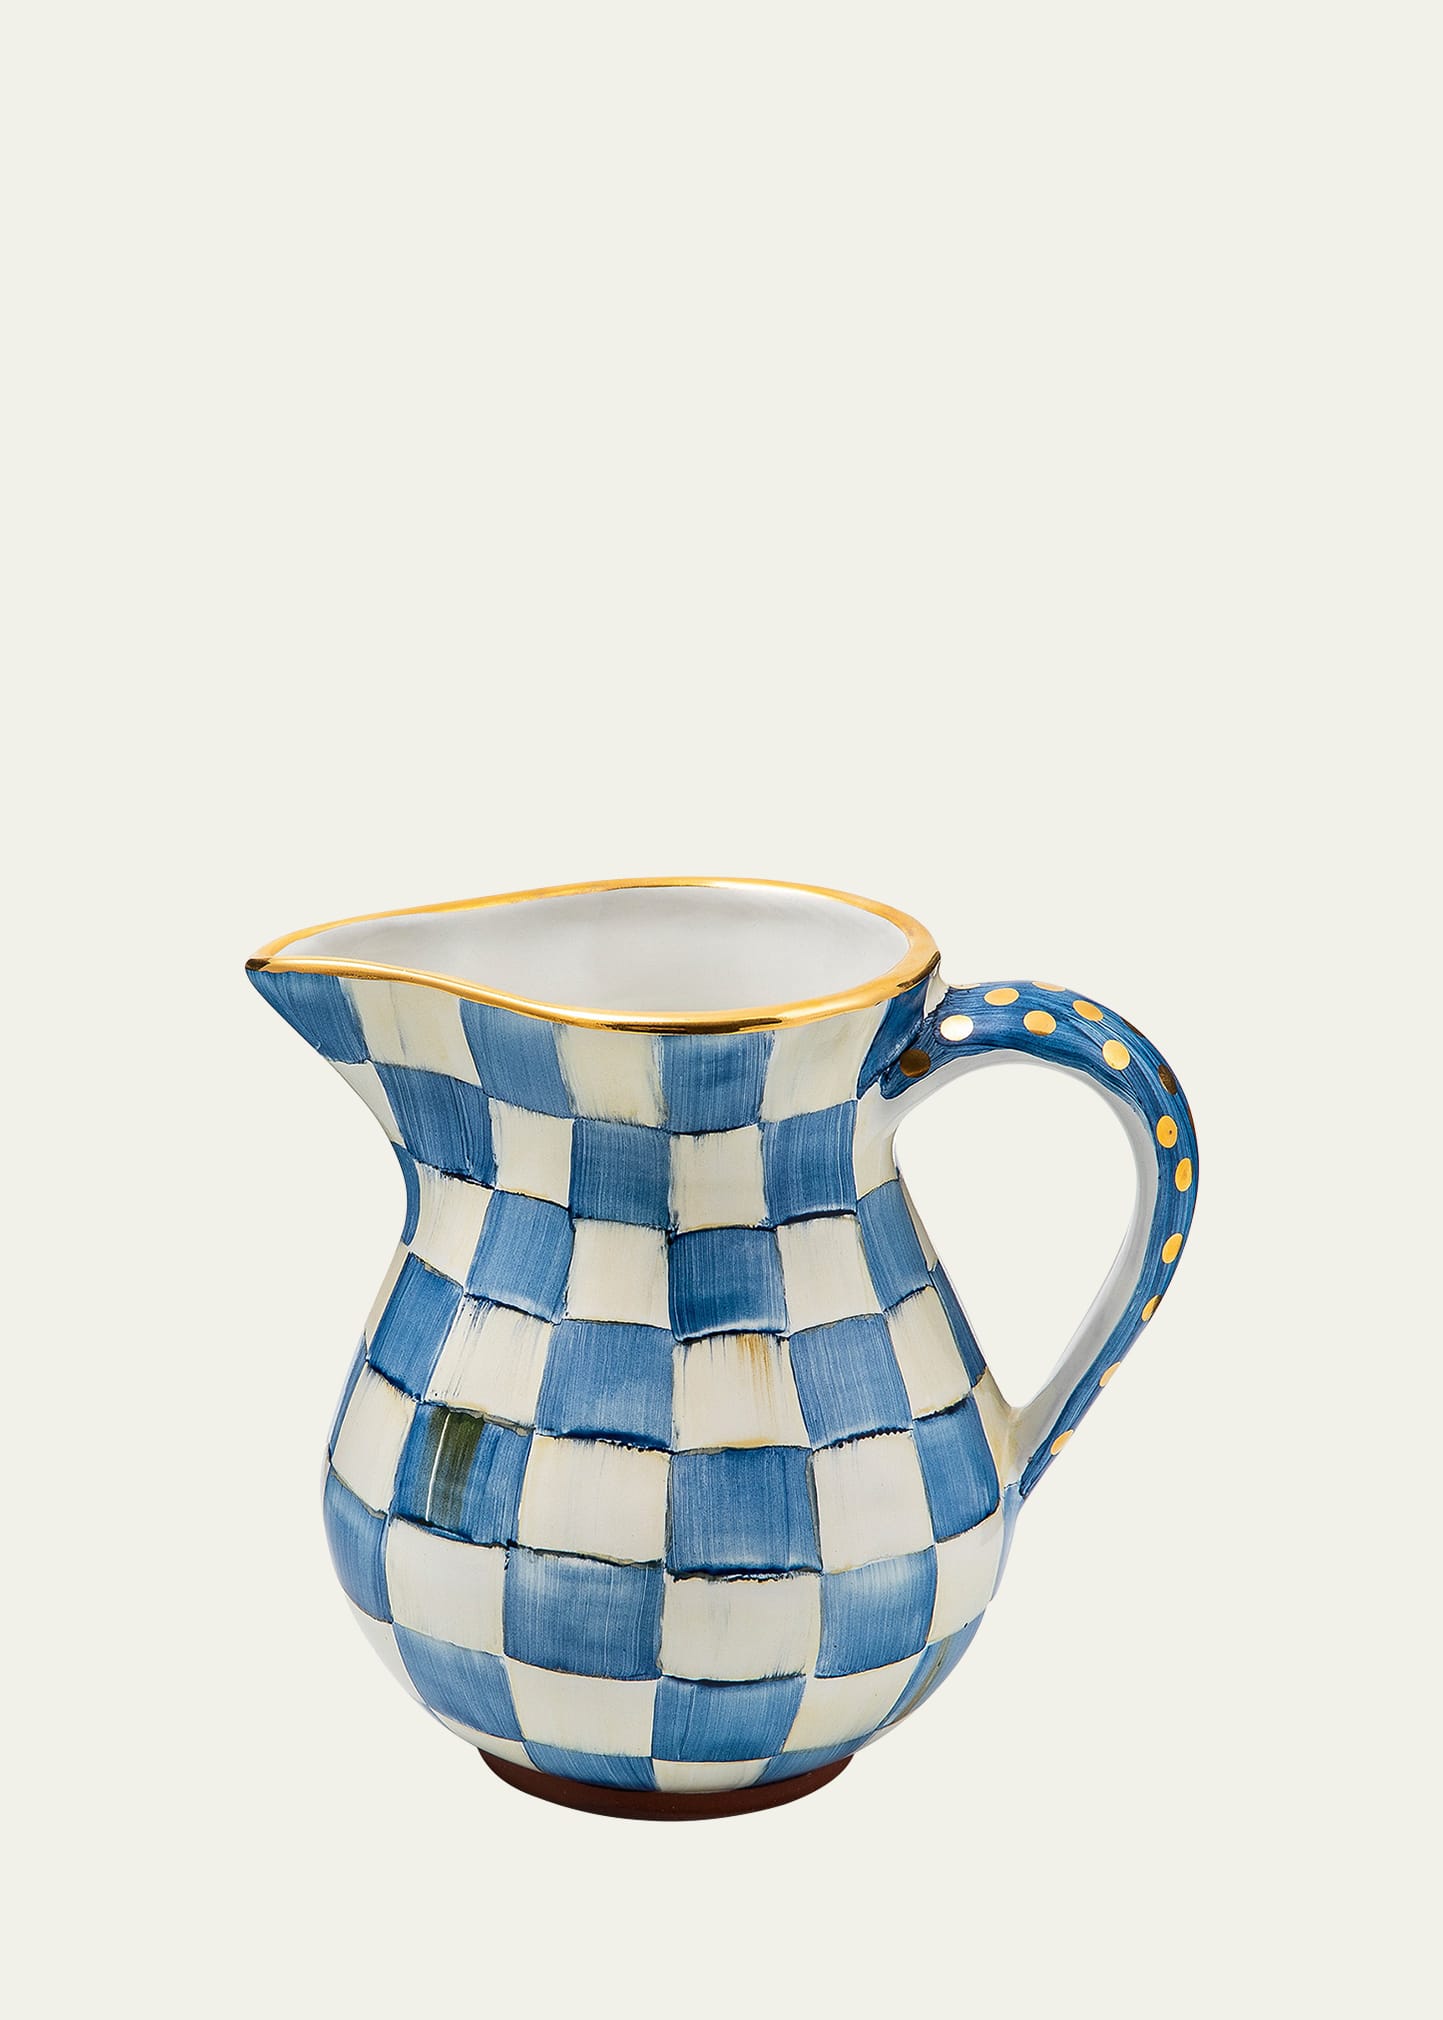 Mackenzie-childs Royal Check Portly Pitcher, 52 Oz. In Blue